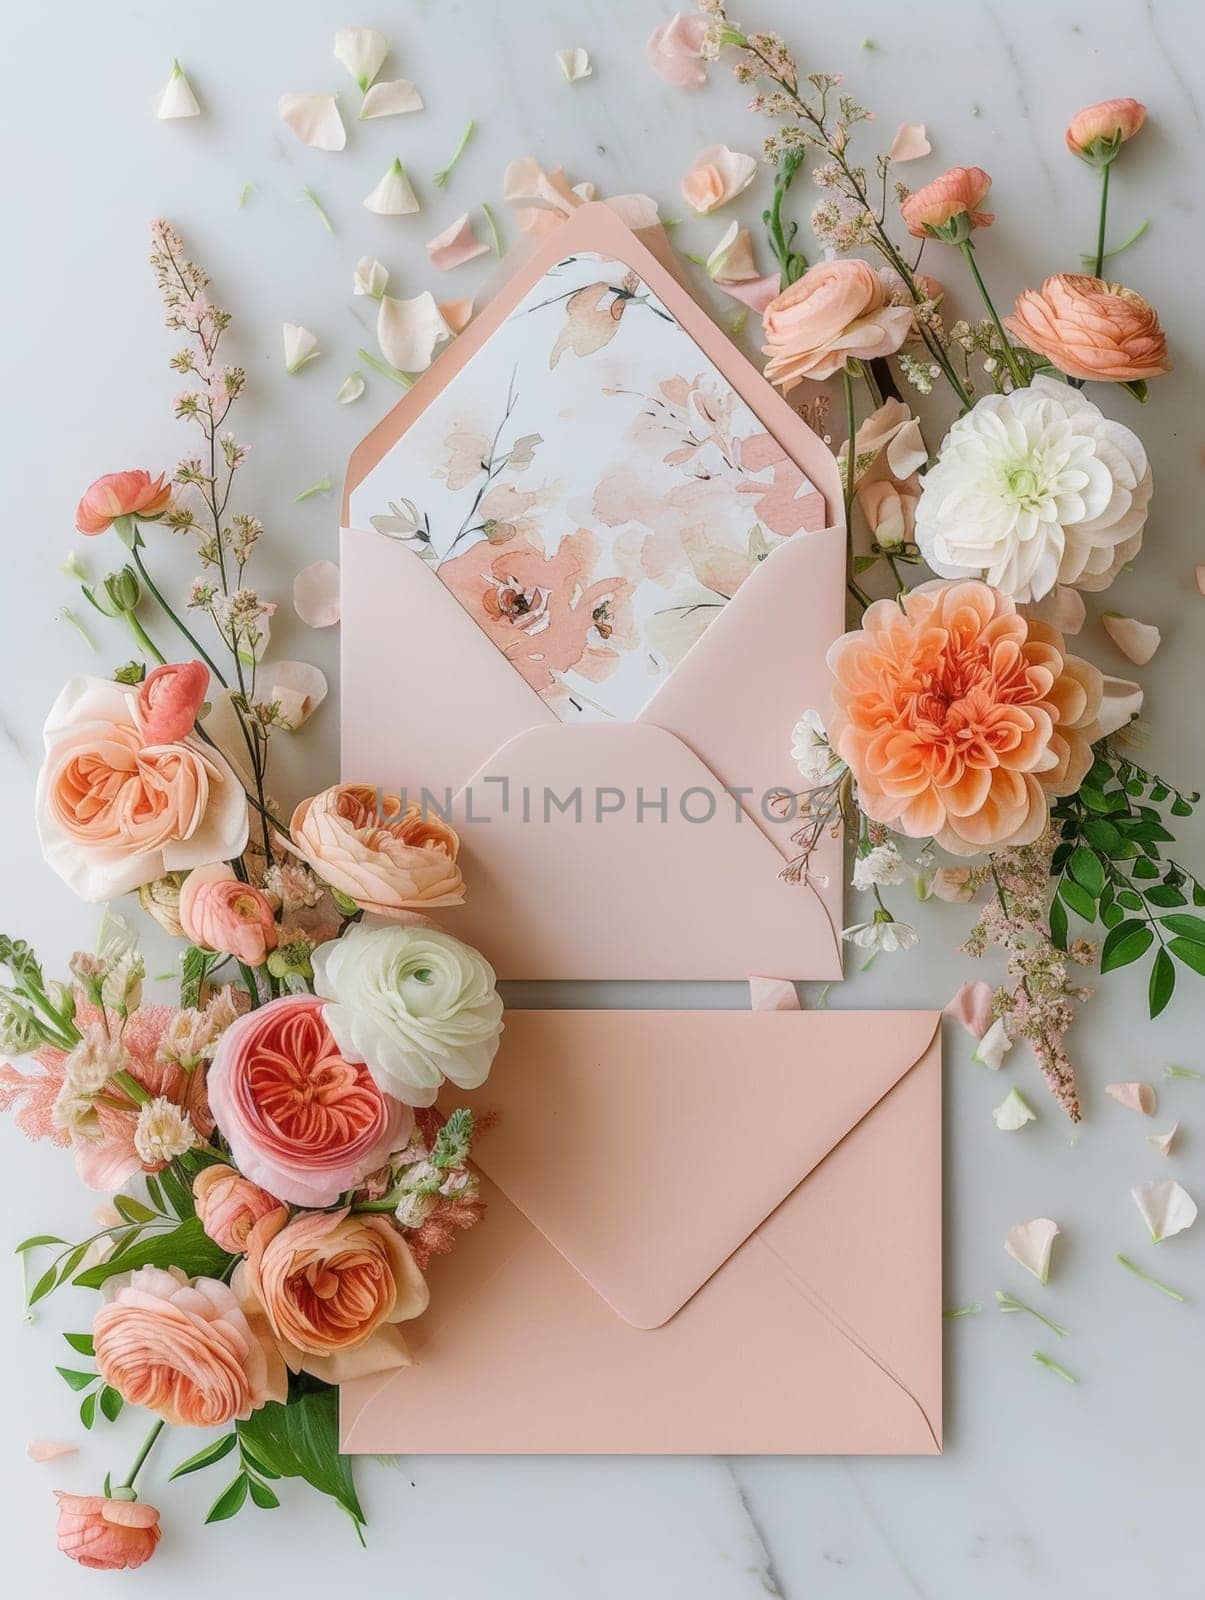 A pink envelope with a white card and flowers